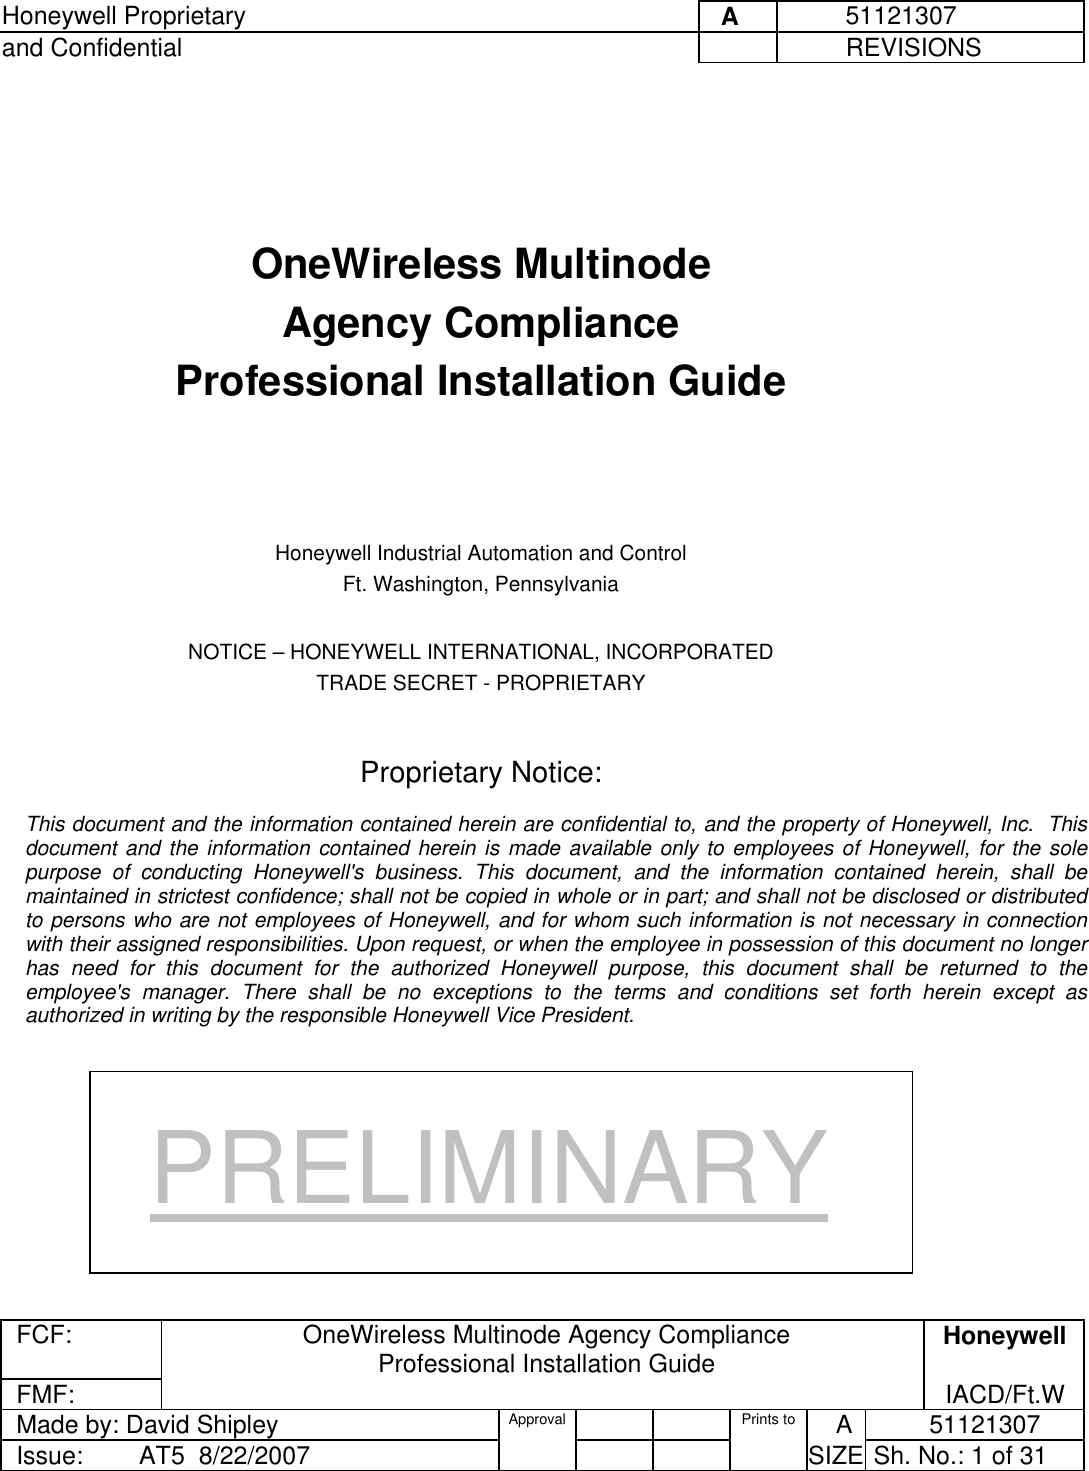 Honeywell Proprietary     A          51121307 and Confidential             REVISIONS  FCF:  OneWireless Multinode Agency Compliance Professional Installation Guide  Honeywell FMF:               IACD/Ft.W Made by: David Shipley  Approval   Prints to     A           51121307 Issue:        AT5  8/22/2007          SIZE  Sh. No.: 1 of 31      OneWireless Multinode  Agency Compliance Professional Installation Guide      Honeywell Industrial Automation and Control Ft. Washington, Pennsylvania  NOTICE – HONEYWELL INTERNATIONAL, INCORPORATED TRADE SECRET - PROPRIETARY   Proprietary Notice:  This document and the information contained herein are confidential to, and the property of Honeywell, Inc.  This document and the information contained herein is made available only to employees of Honeywell, for the sole purpose of conducting Honeywell&apos;s business. This document, and the information contained herein, shall be maintained in strictest confidence; shall not be copied in whole or in part; and shall not be disclosed or distributed to persons who are not employees of Honeywell, and for whom such information is not necessary in connection with their assigned responsibilities. Upon request, or when the employee in possession of this document no longer has need for this document for the authorized Honeywell purpose, this document shall be returned to the employee&apos;s manager. There shall be no exceptions to the terms and conditions set forth herein except as authorized in writing by the responsible Honeywell Vice President. PRELIMINARY 